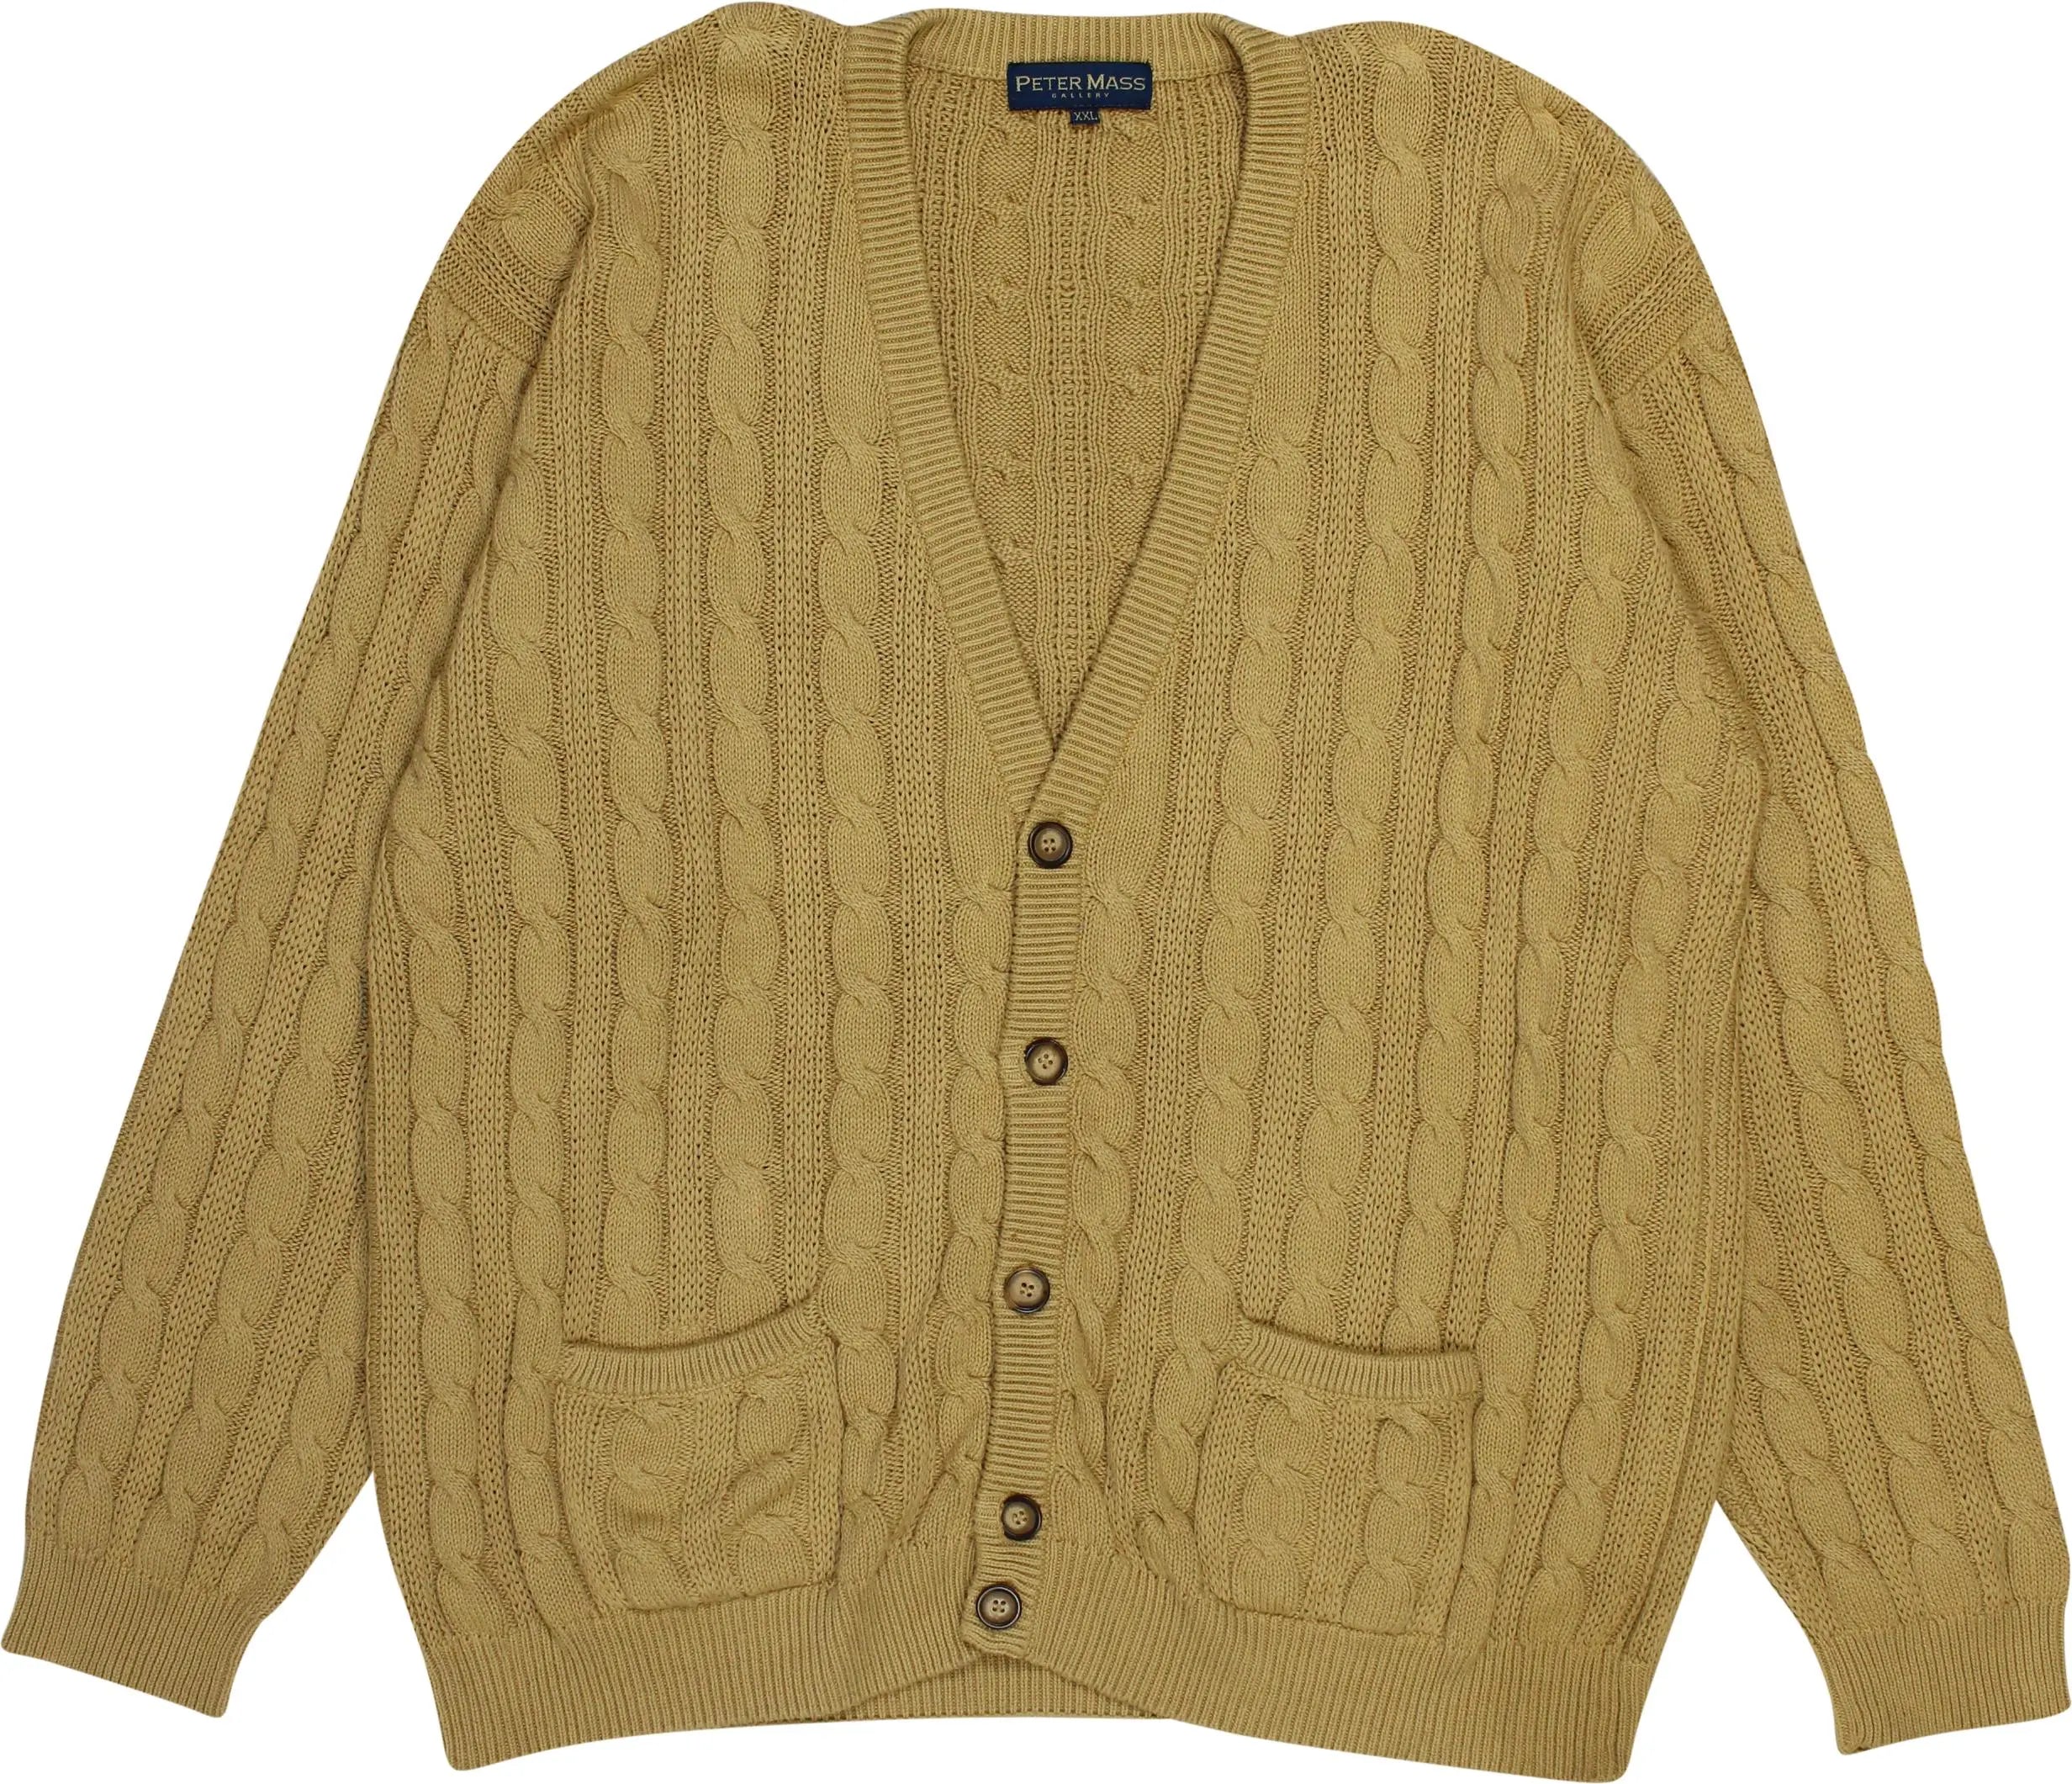 Peter Mass - 90s Cable Knit Cardigan- ThriftTale.com - Vintage and second handclothing